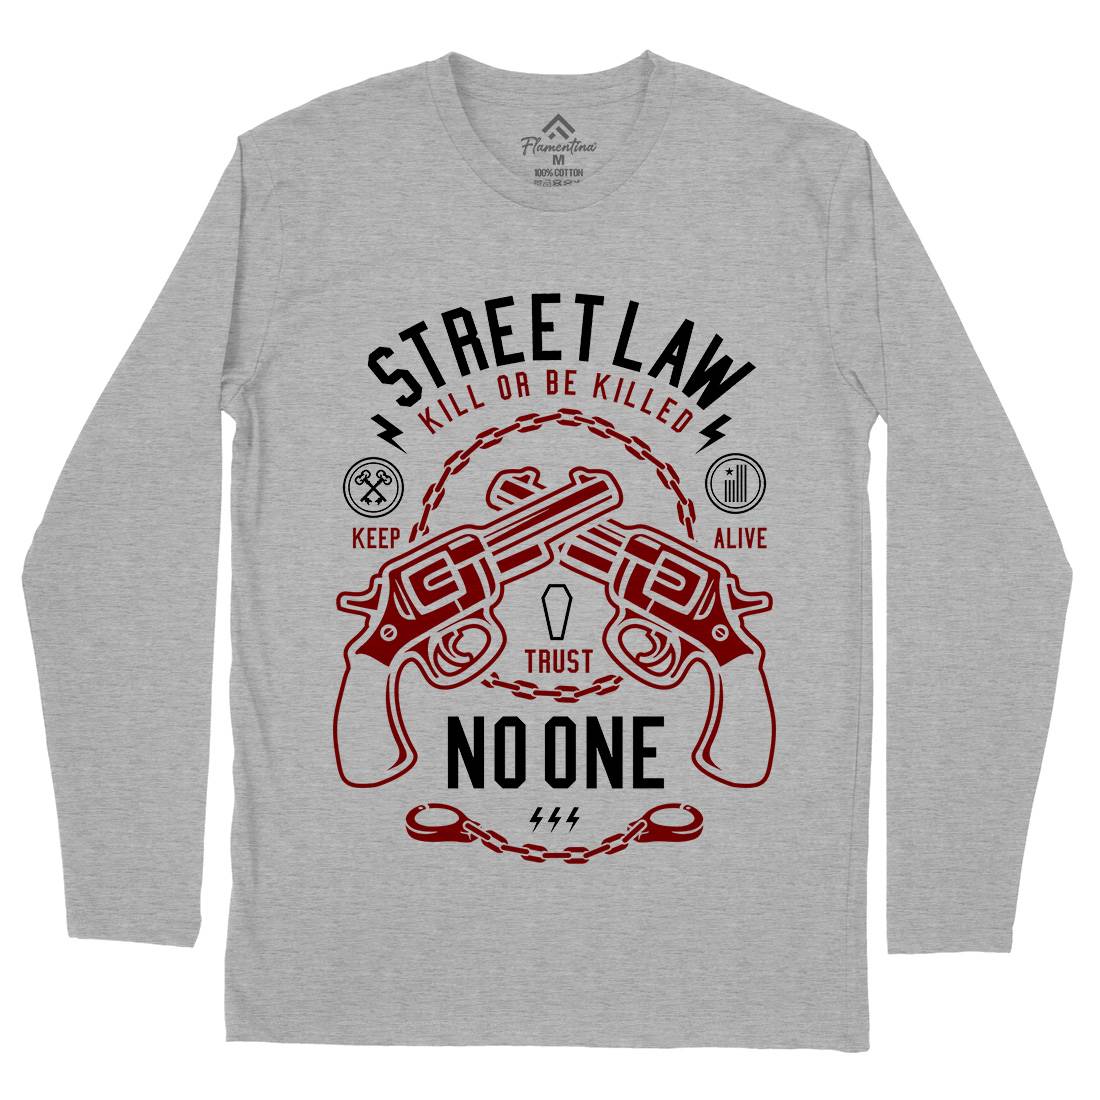 Street Law Mens Long Sleeve T-Shirt Quotes A286